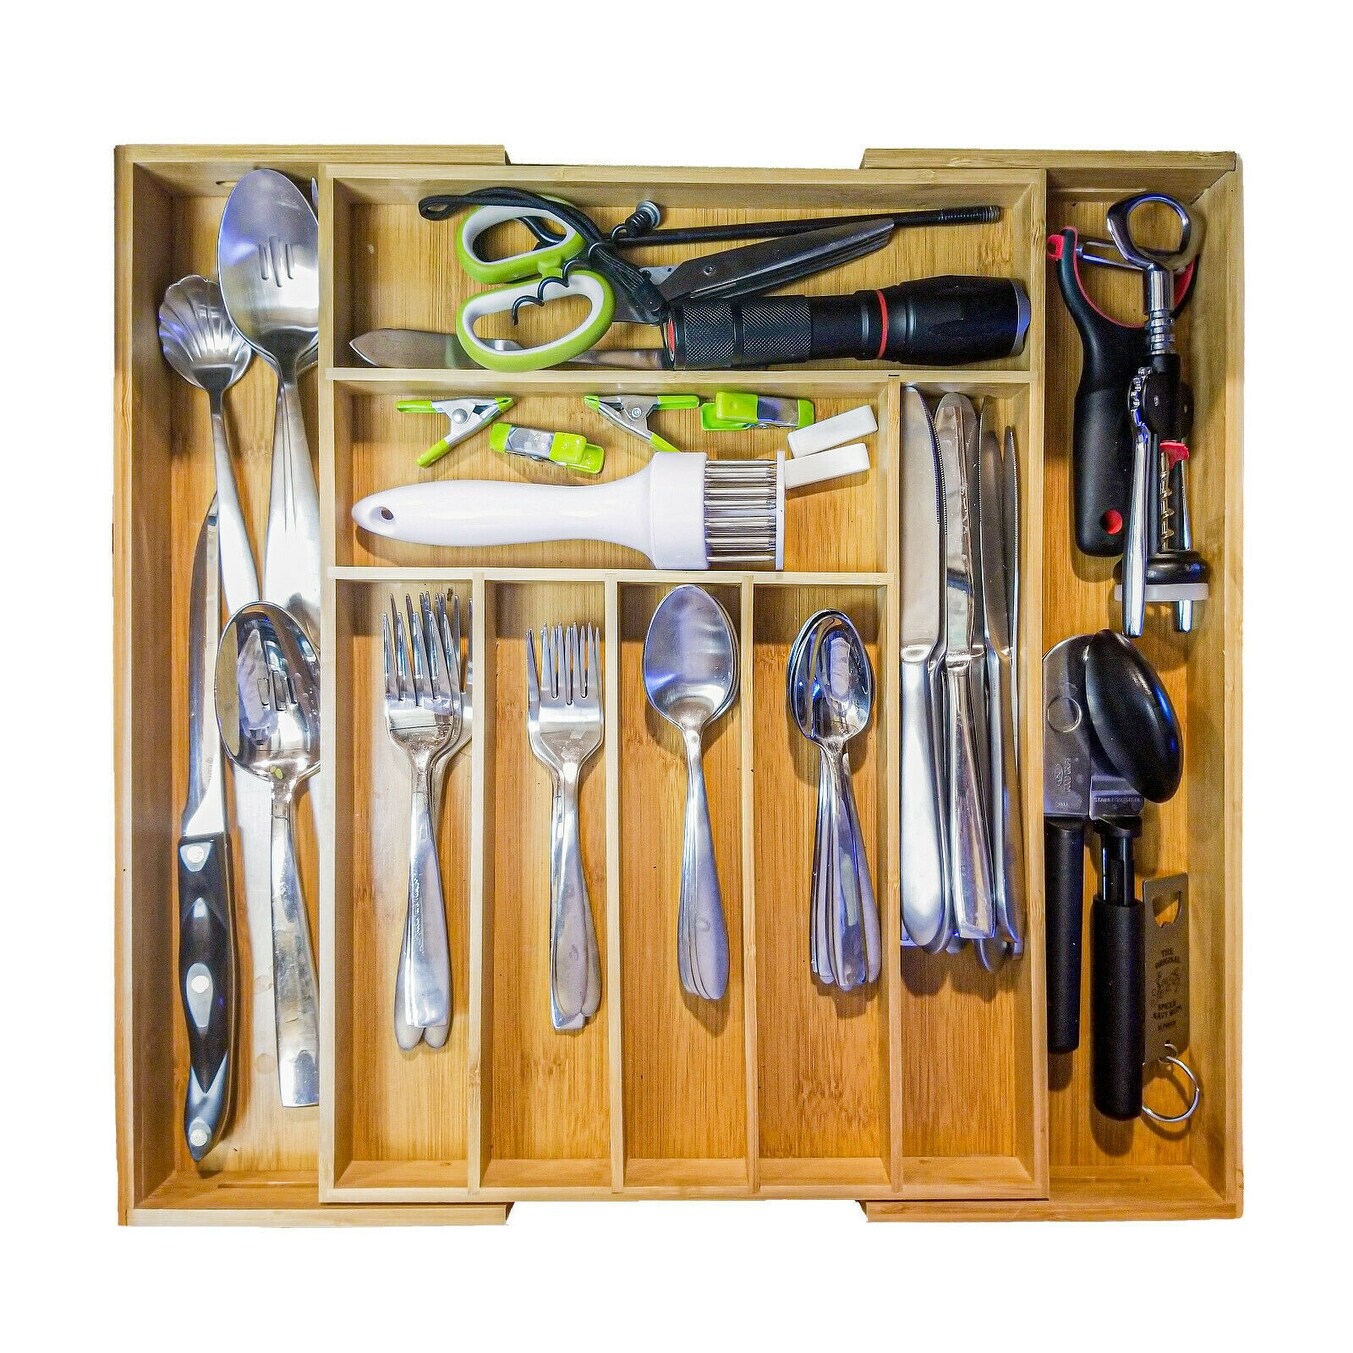 https://ak1.ostkcdn.com/images/products/is/images/direct/5315cf52f9e7d4cb114d6ffaf3f125a3dd349ebf/Bamboo-Expandable-Drawer-Organizer---8-Organizing-Compartments---Cutlery-Tray%2C-for-Silverware%2C-Flatware%2C-Knives.jpg